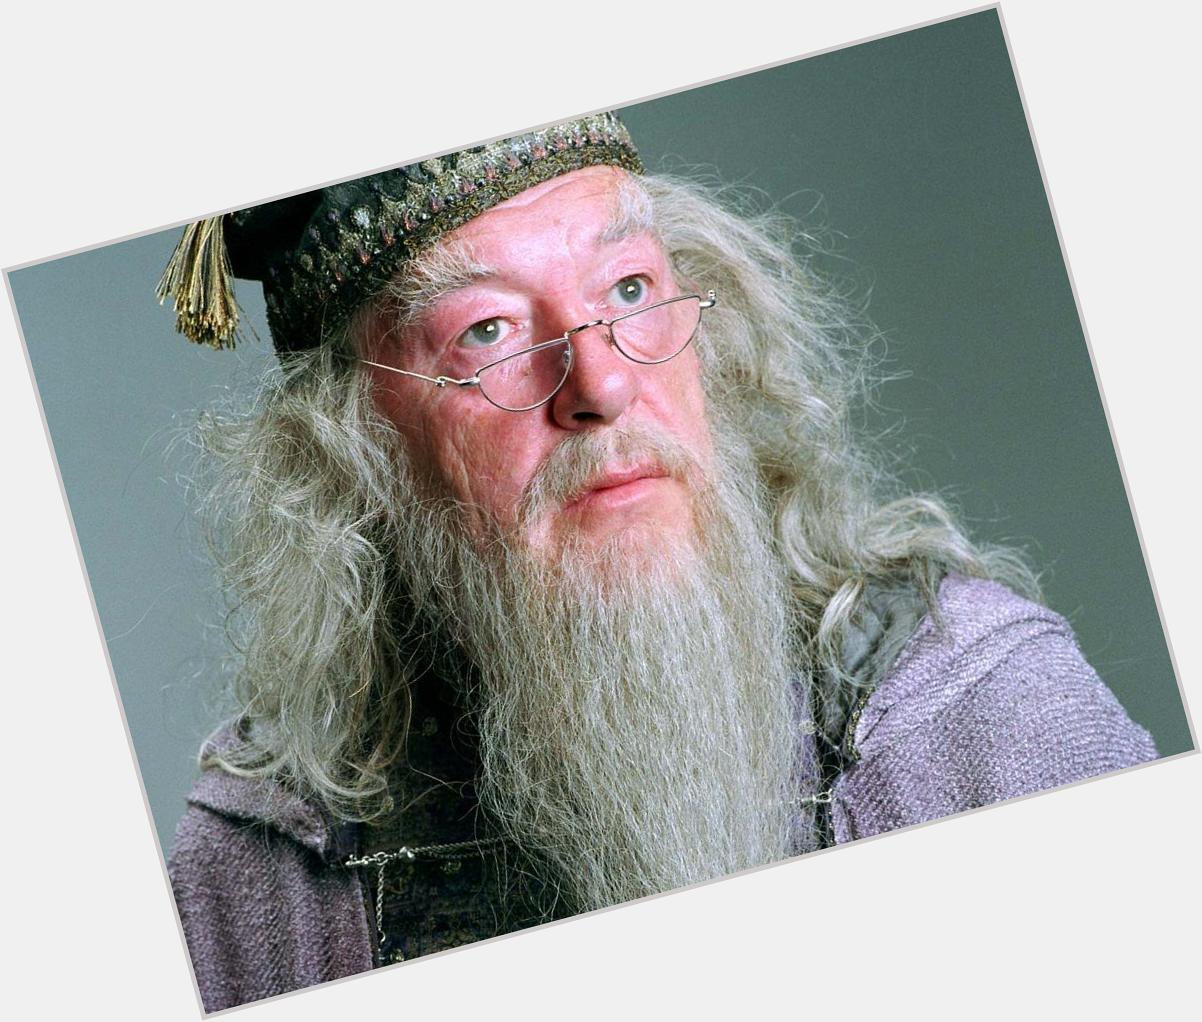 A Belated Happy 75th Birthday to Dumbledore himself, Michael Gambon! Many Happy Returns, sir. 